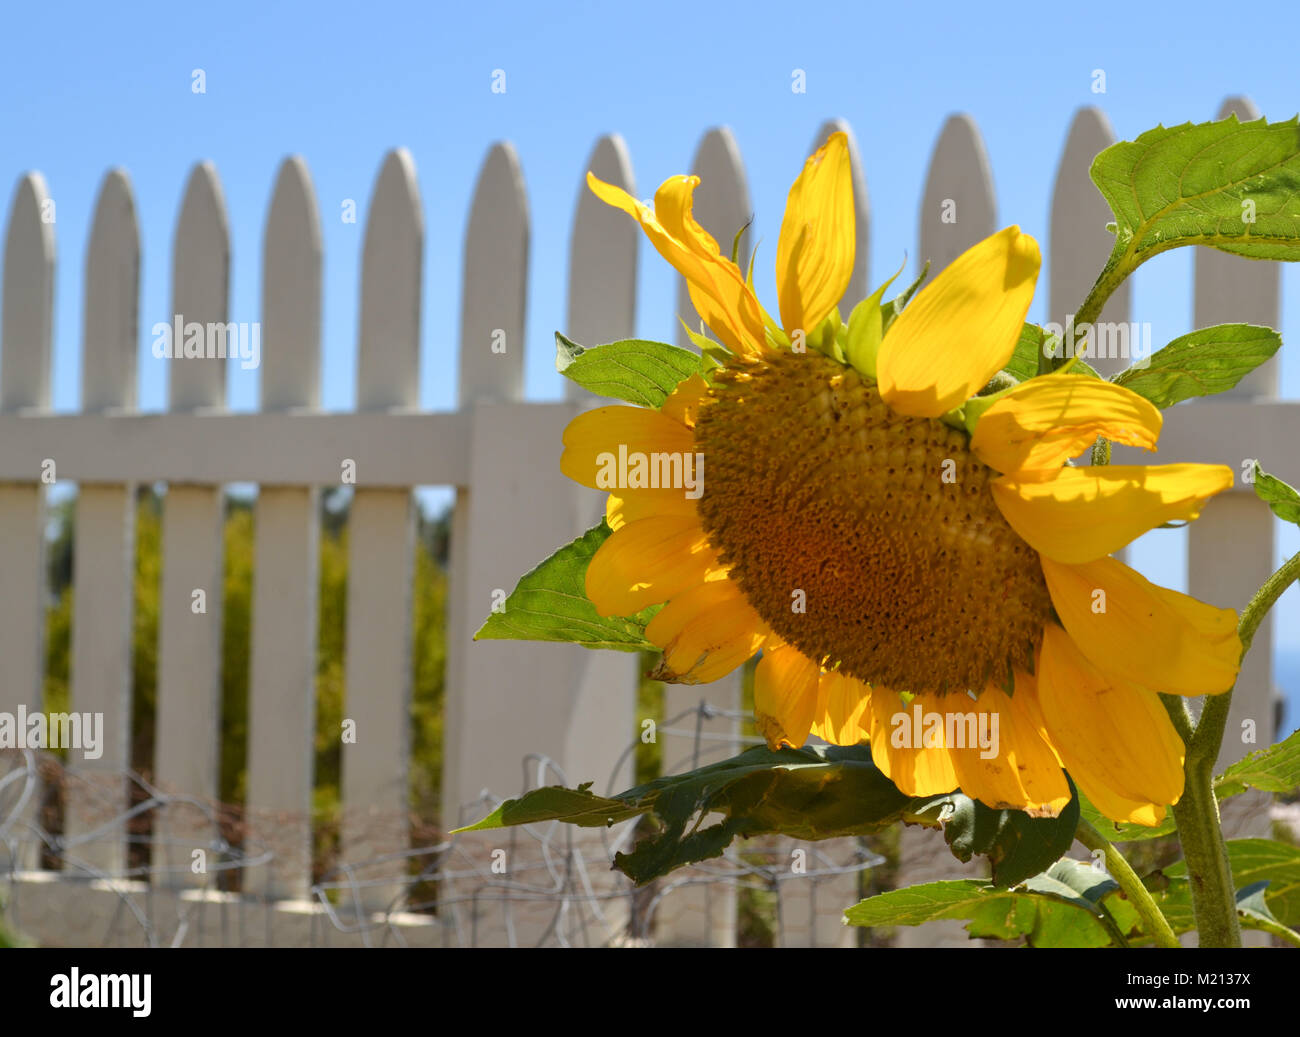 Single sunflower growing  in a white picket fence garden on a hillside overlooking the ocean Stock Photo